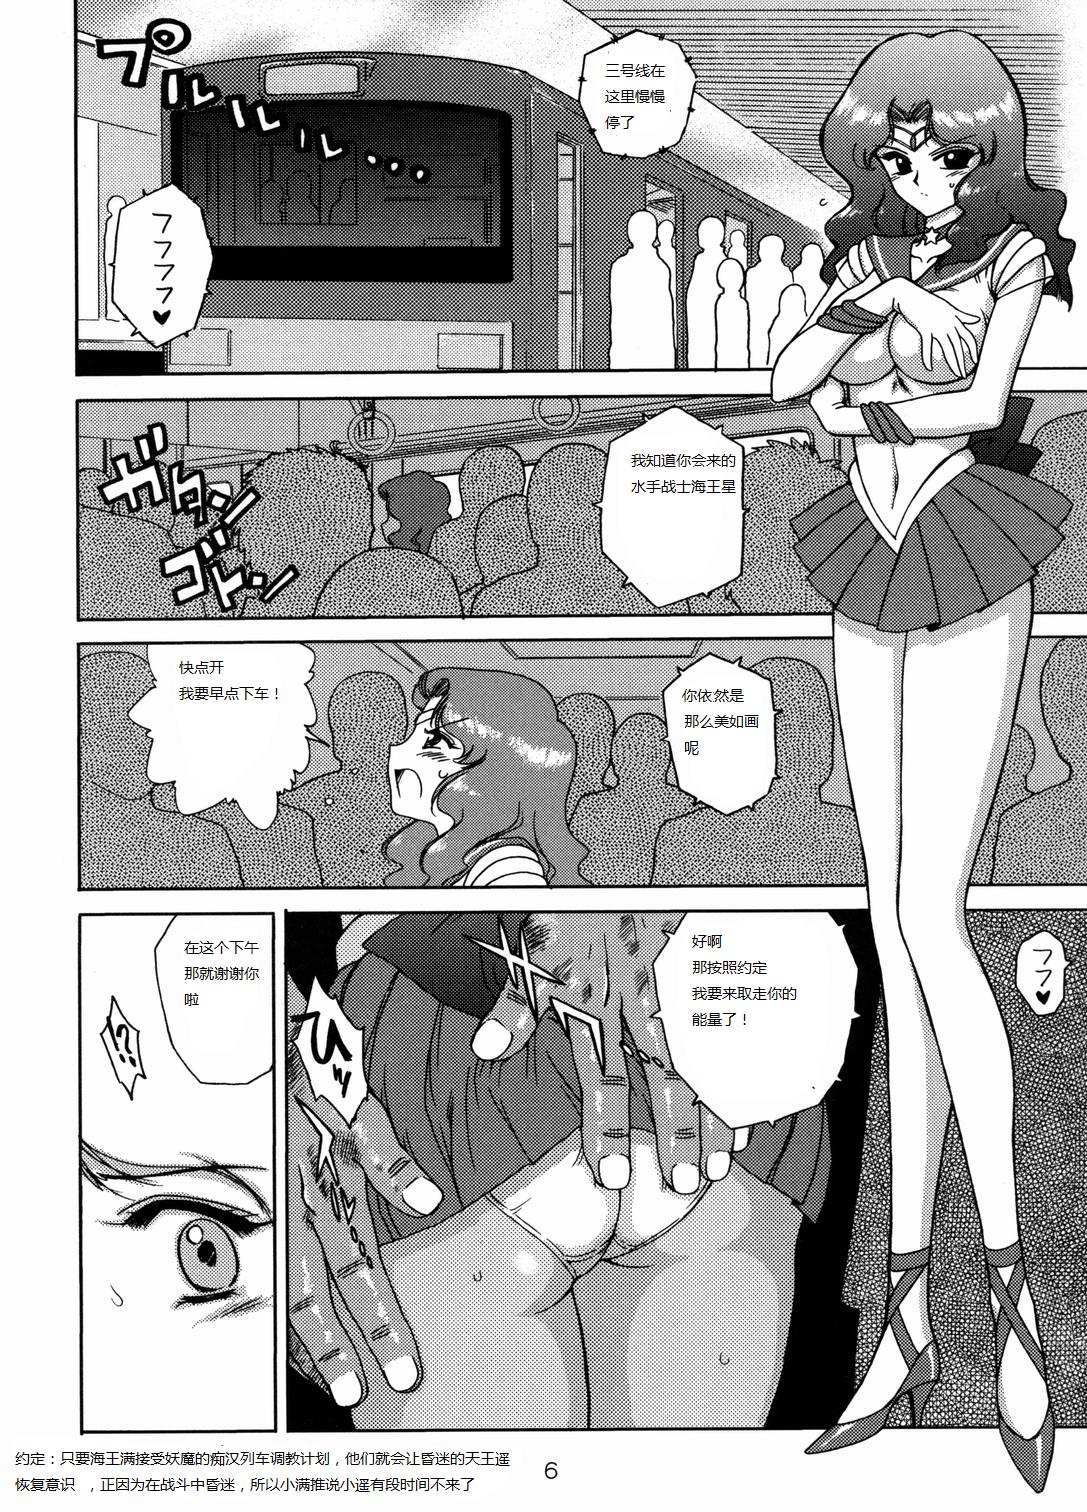 Tgirl Hierophant Green - Sailor moon Chacal - Page 5